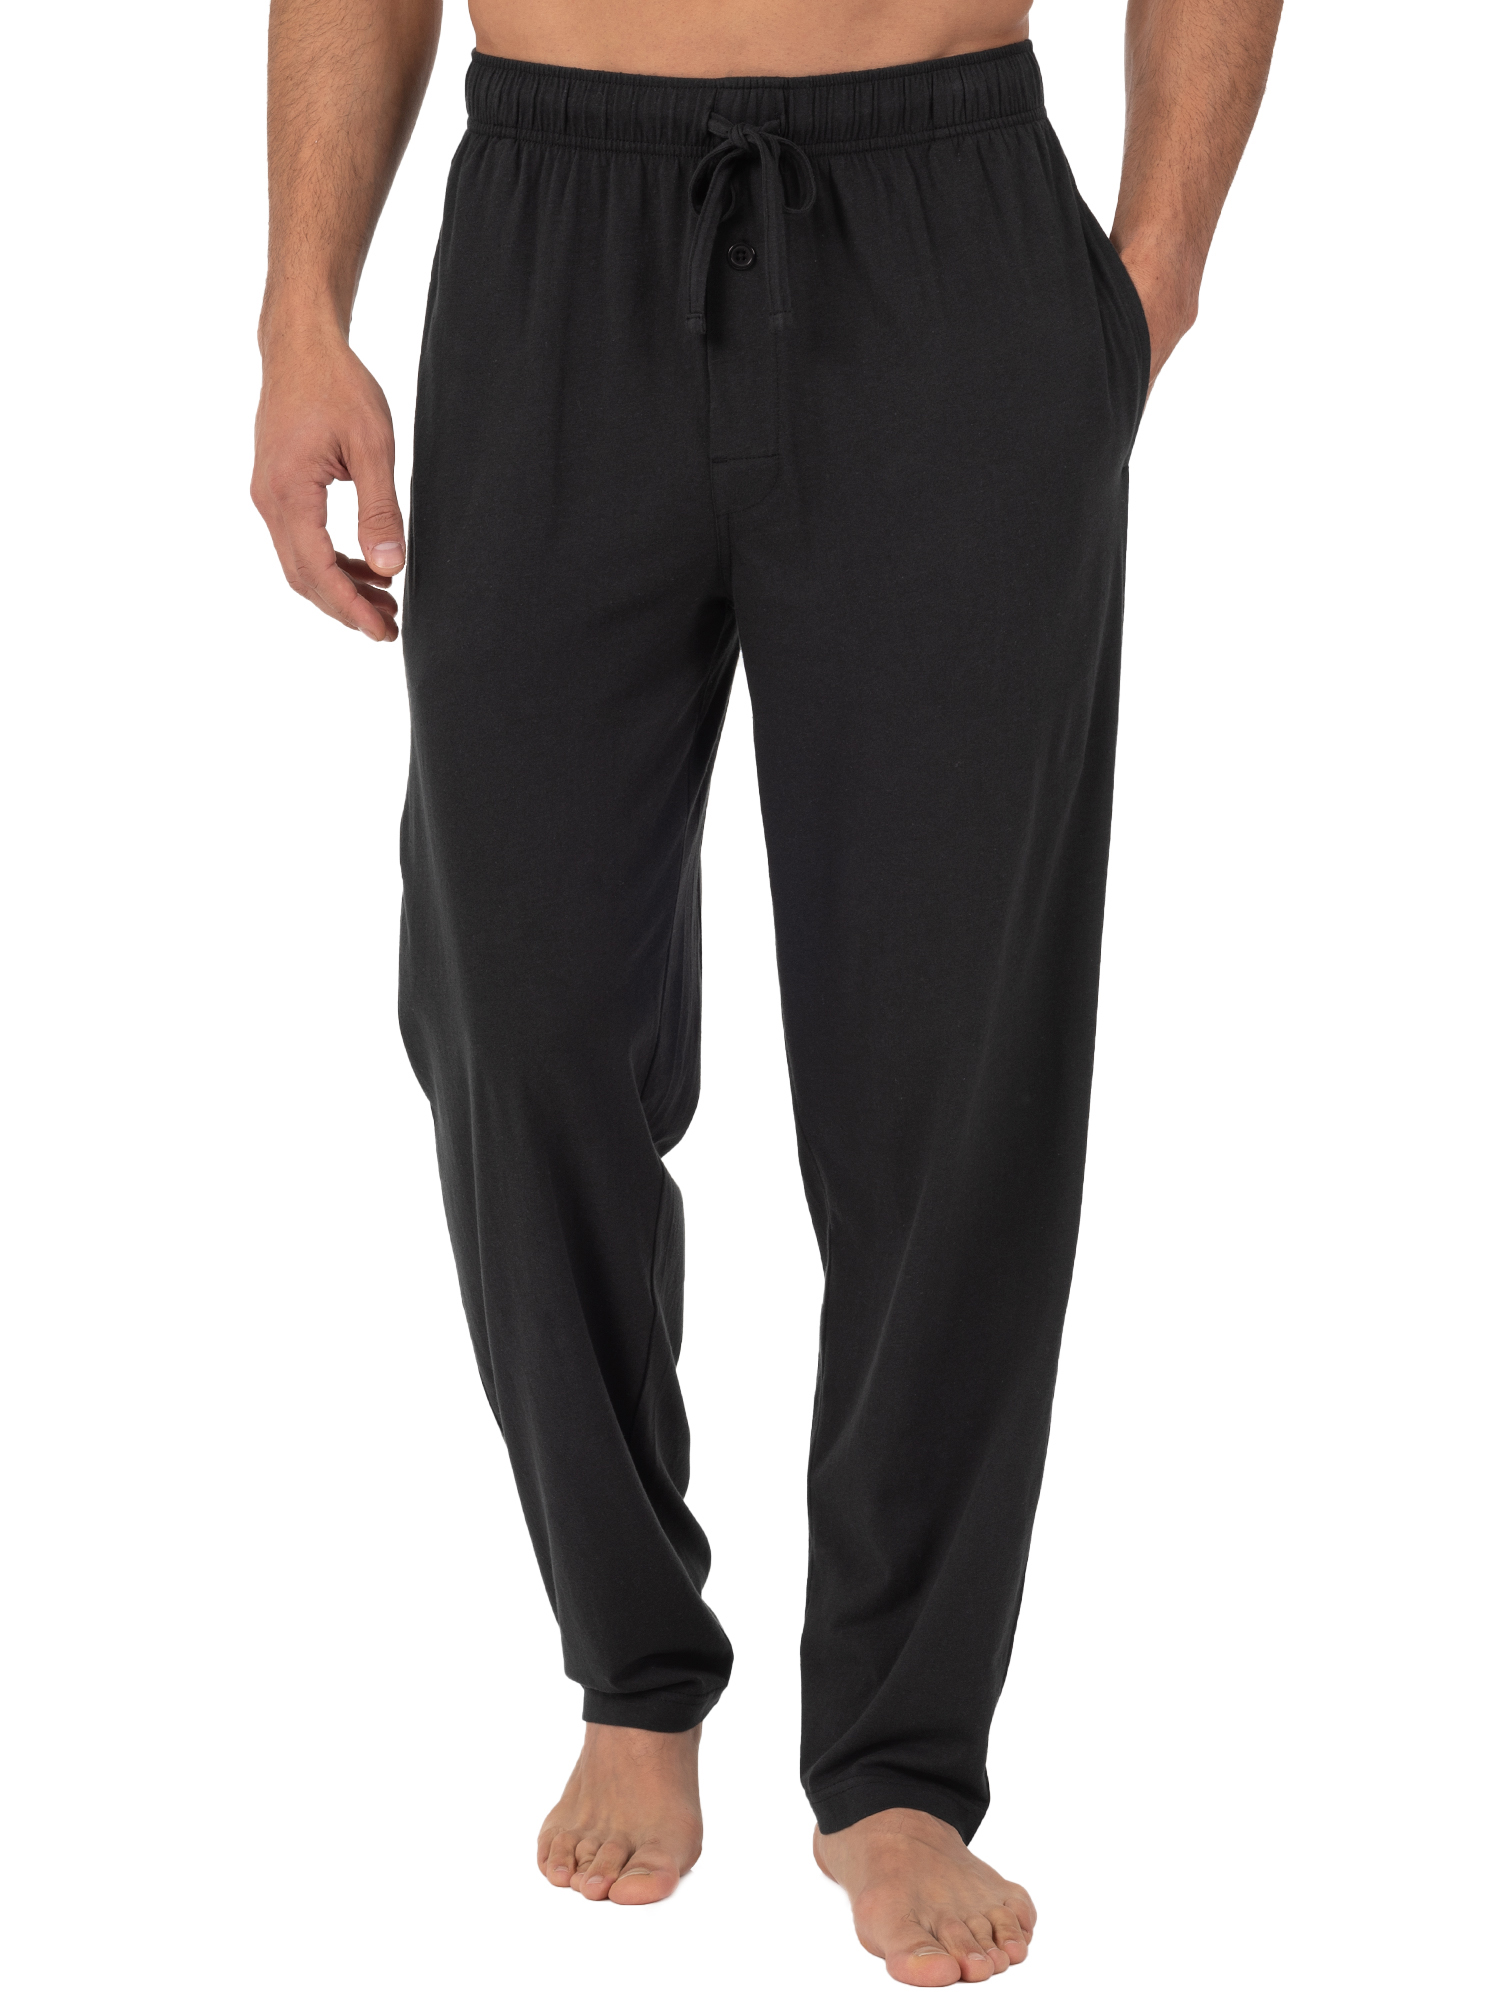 Fruit of the Loom Men's and Big Men's Jersey Knit Pajama Pants, Sizes S-6XL - image 1 of 9